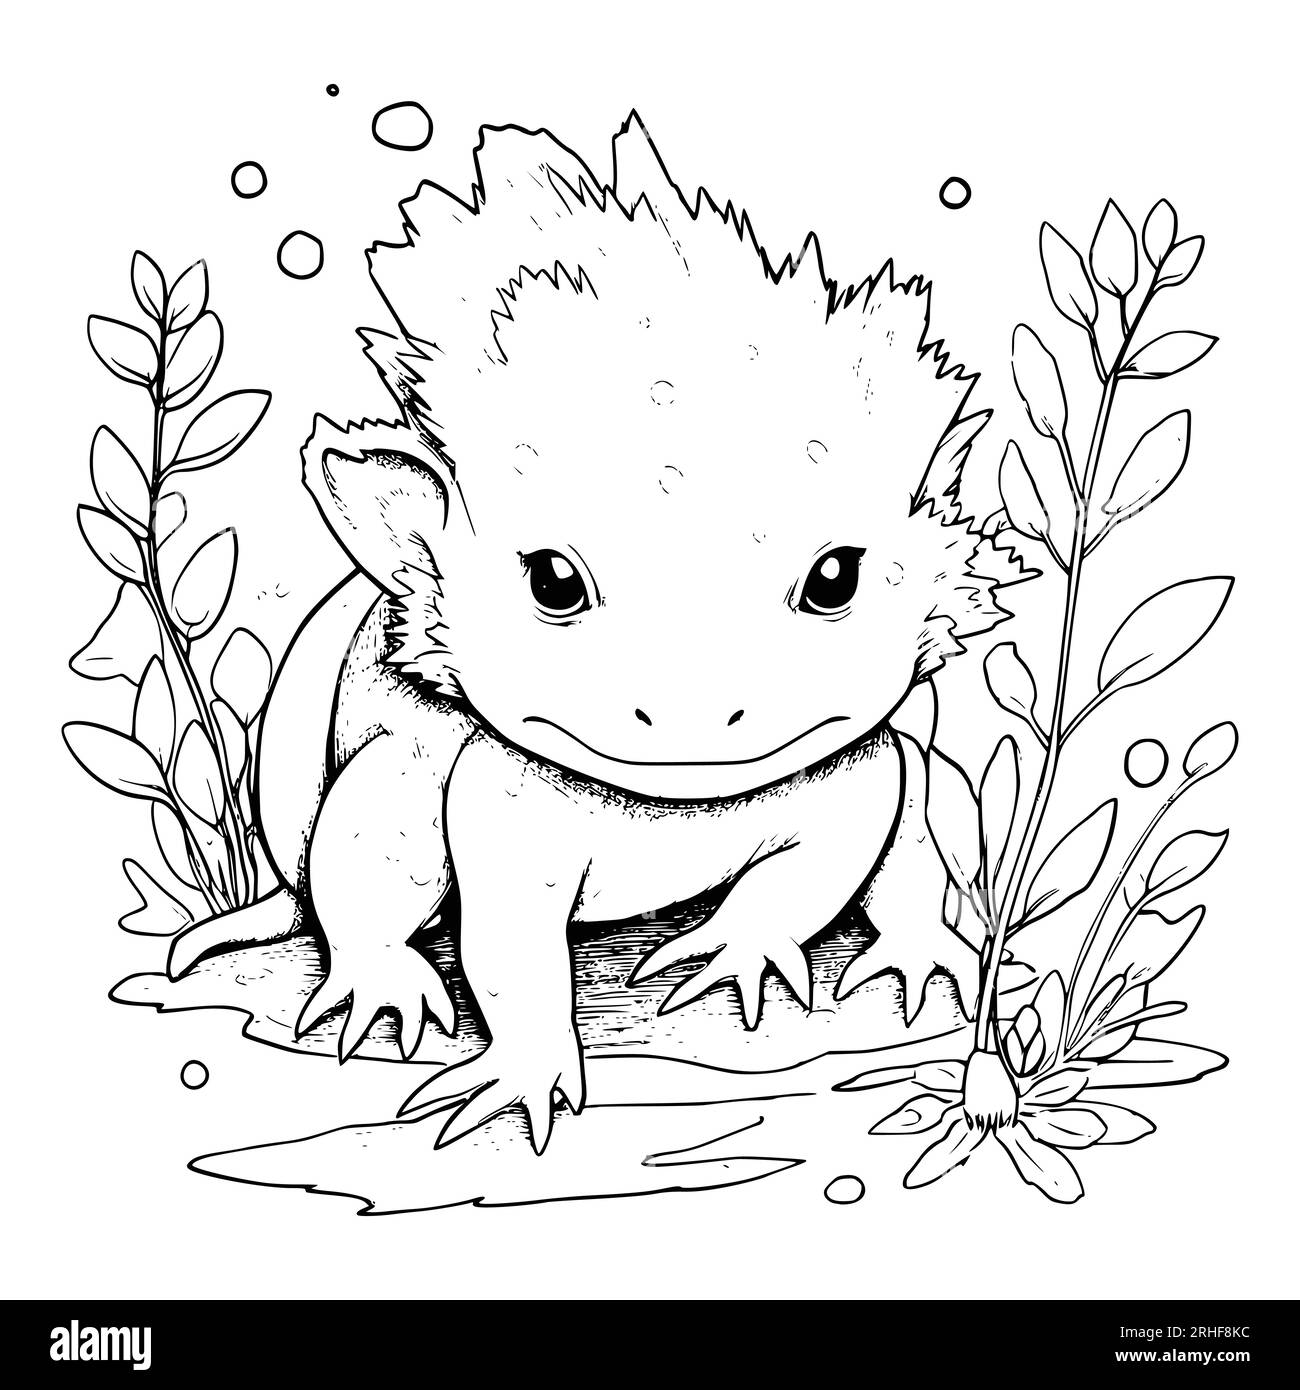 14+ Axolotl Coloring Pages